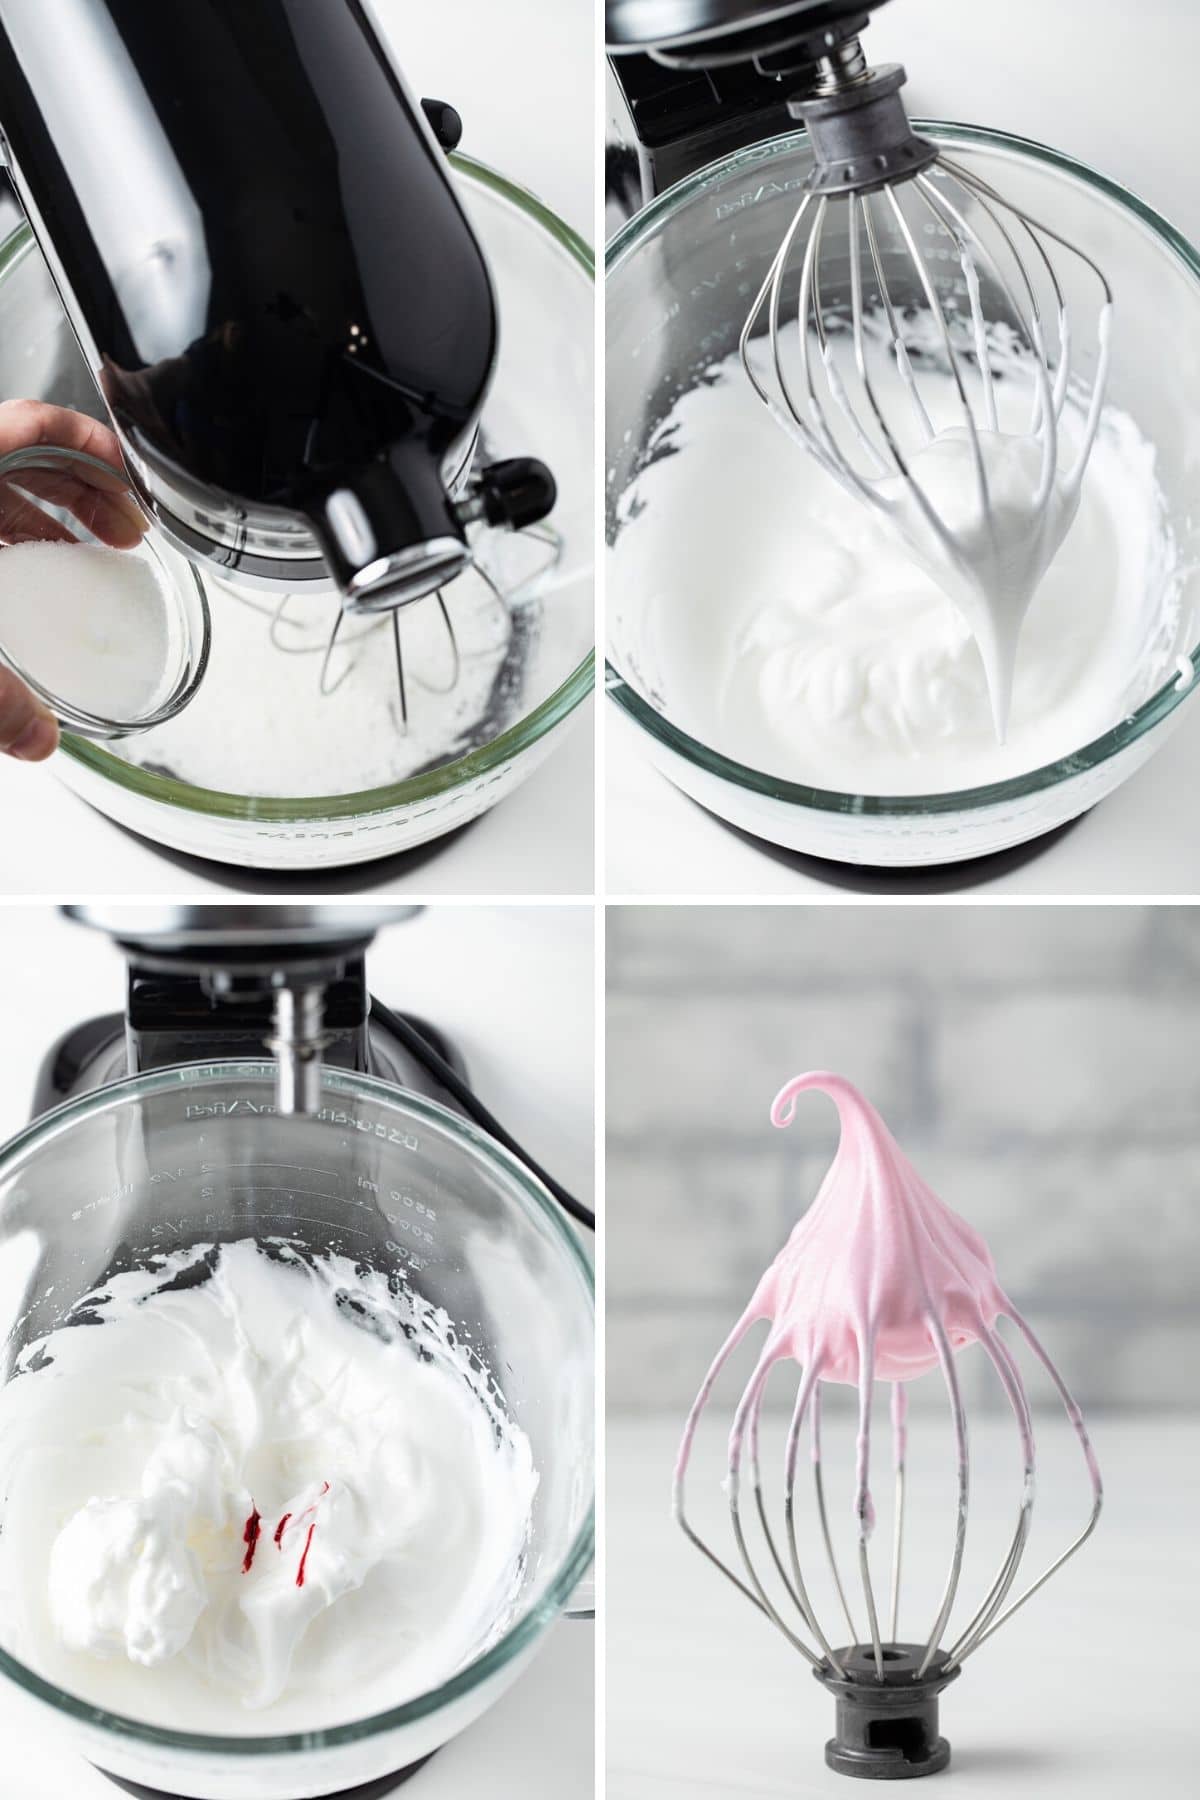 process for making meringue